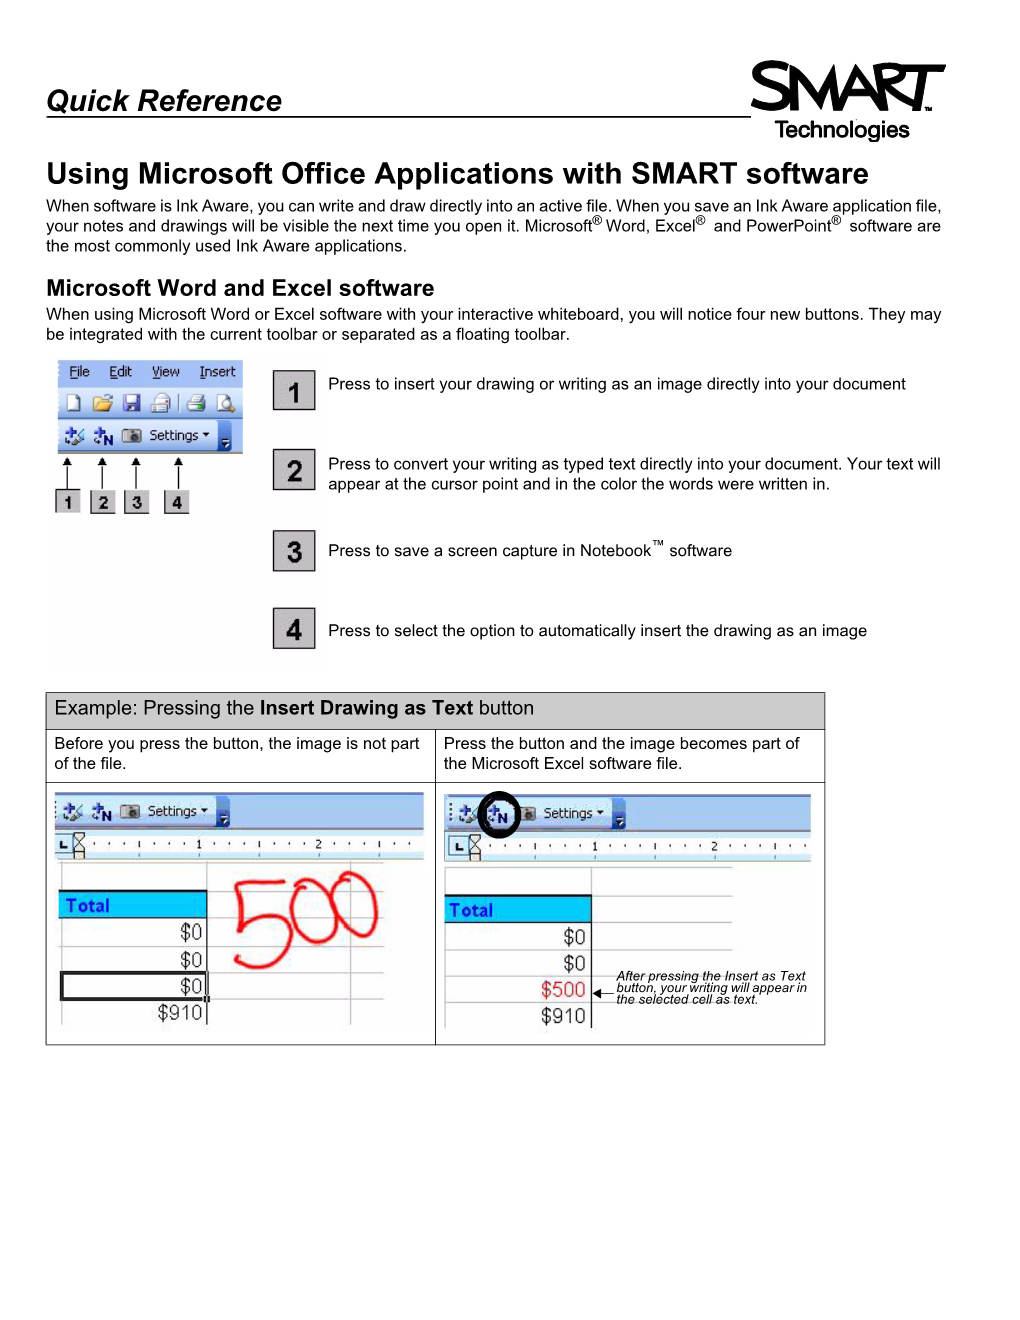 Quick Reference Using Microsoft Office Applications with SMART Software